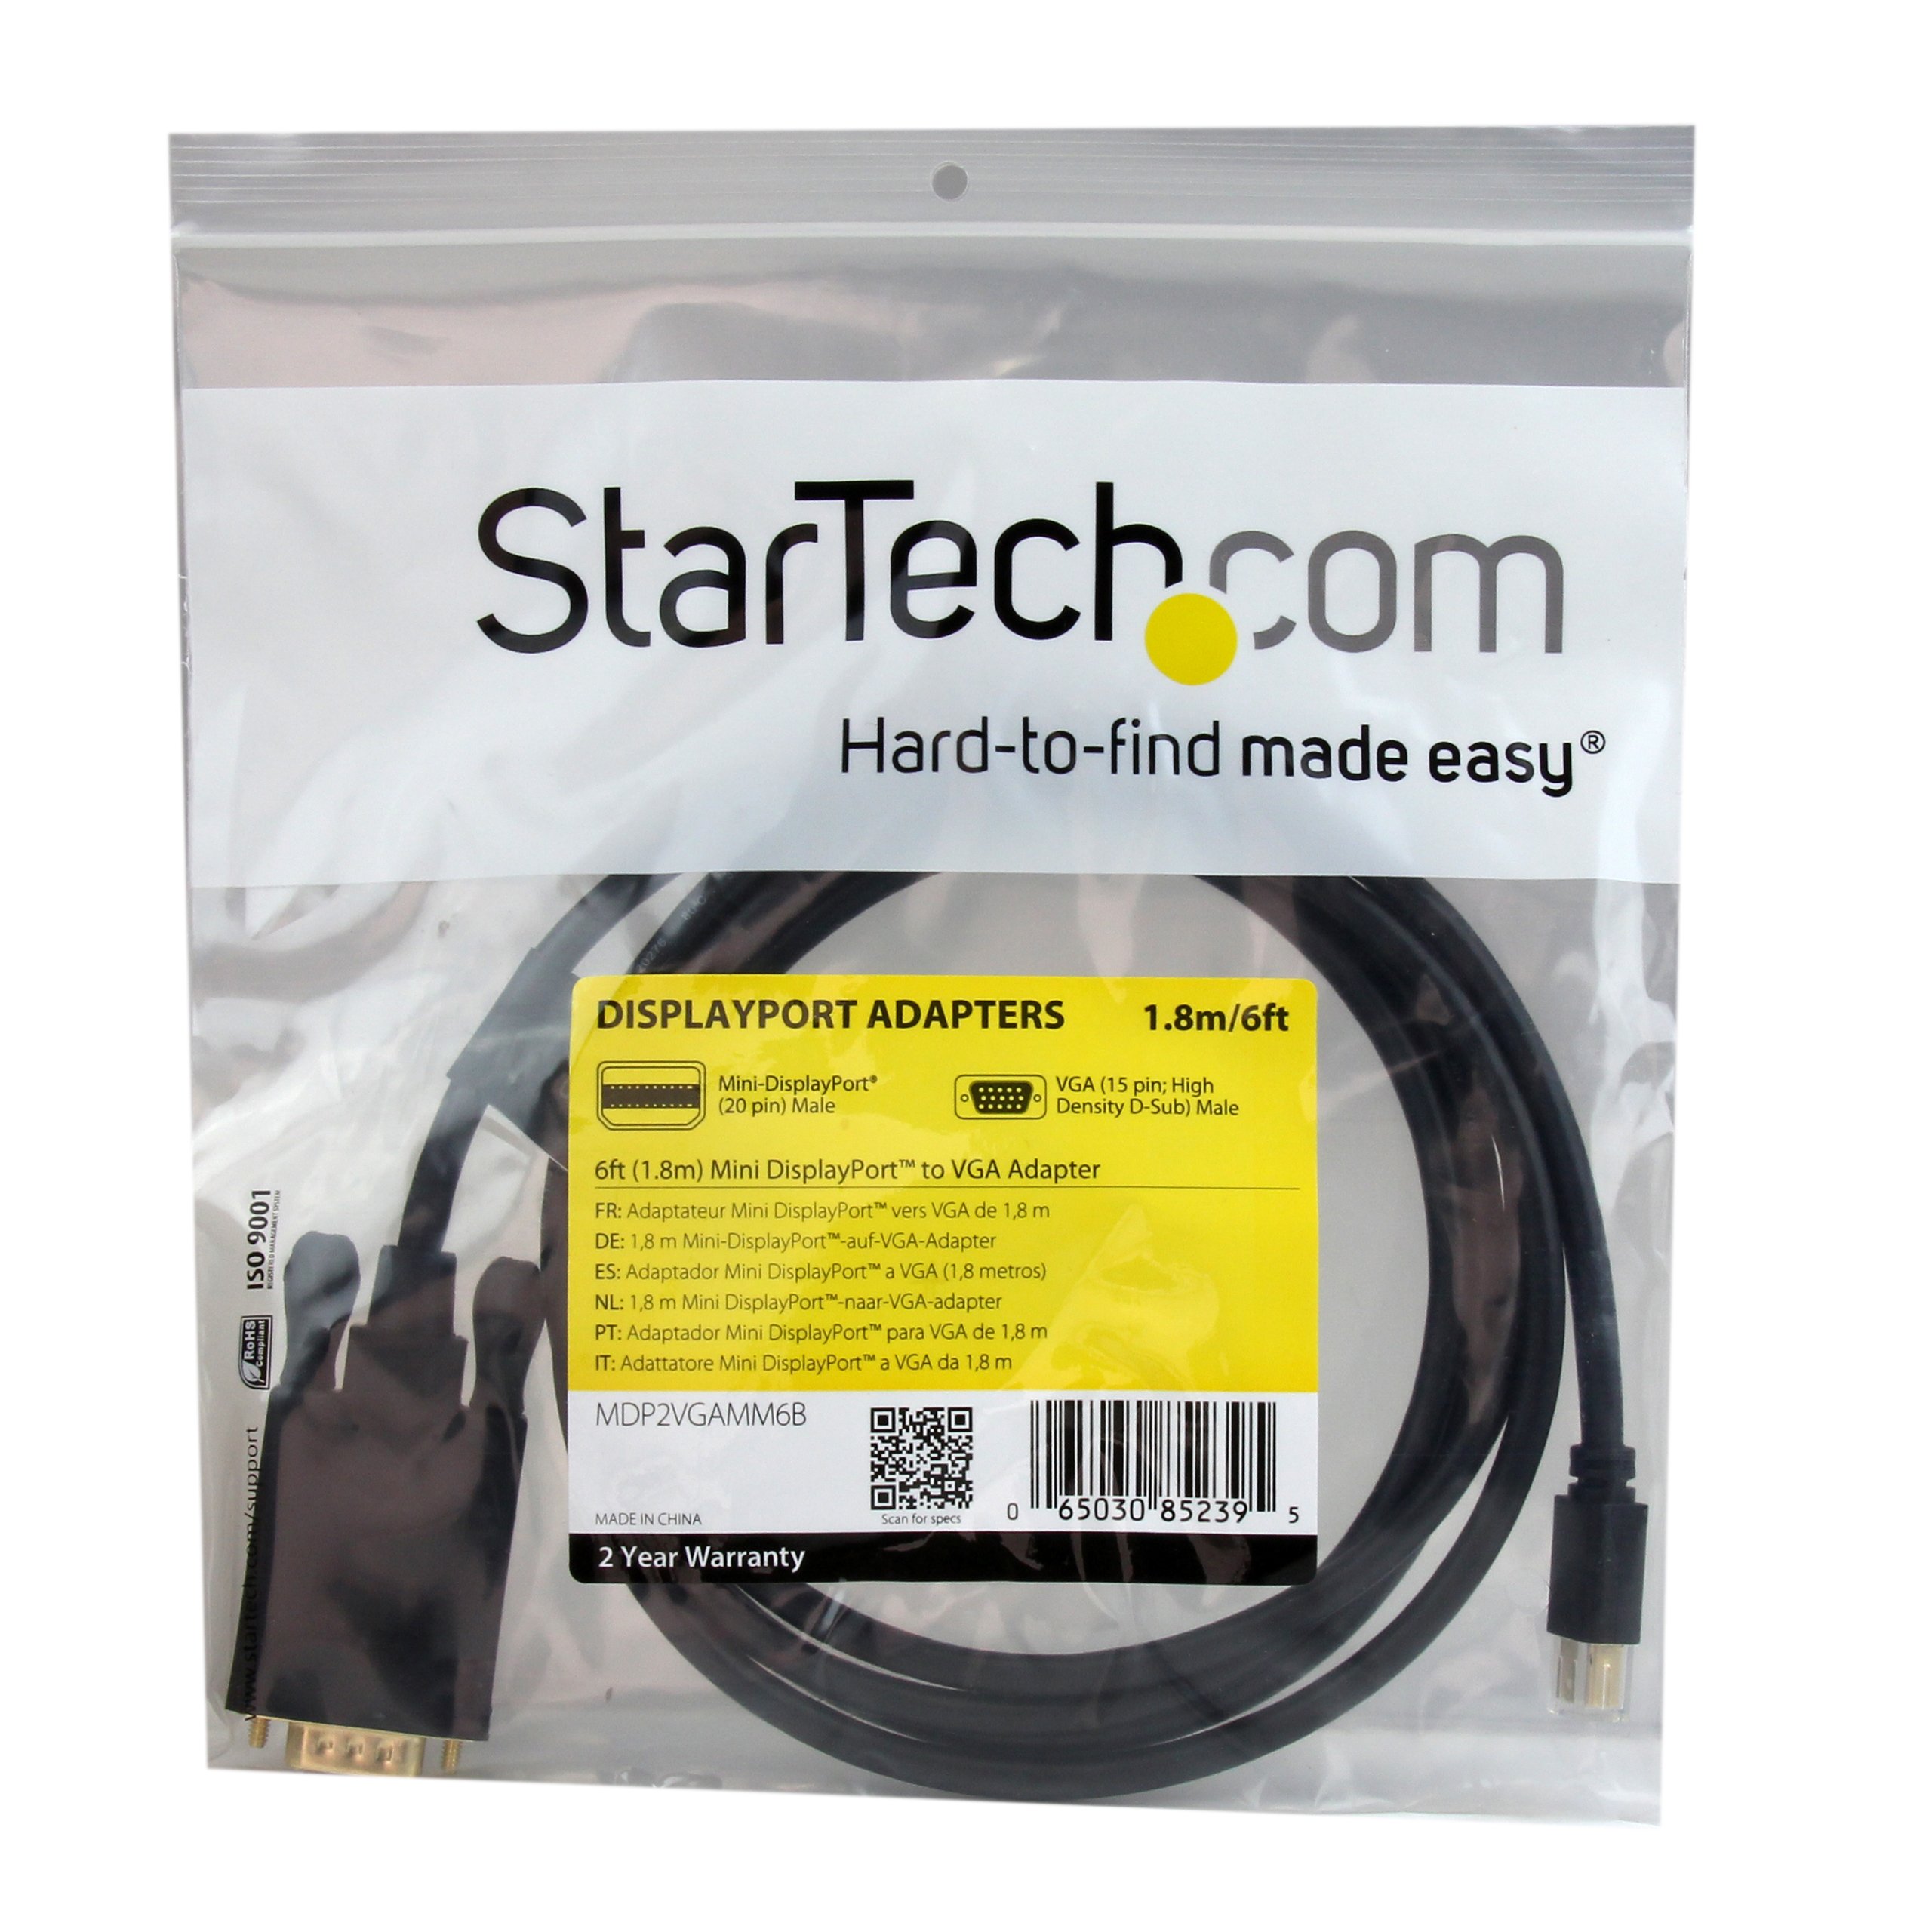 StarTech.com 6ft Mini DisplayPort to VGA Cable - Active - 1920x1200 - mDP to VGA Adapter Cable for Your Computer Monitor (MDP2VGAMM6B) Black